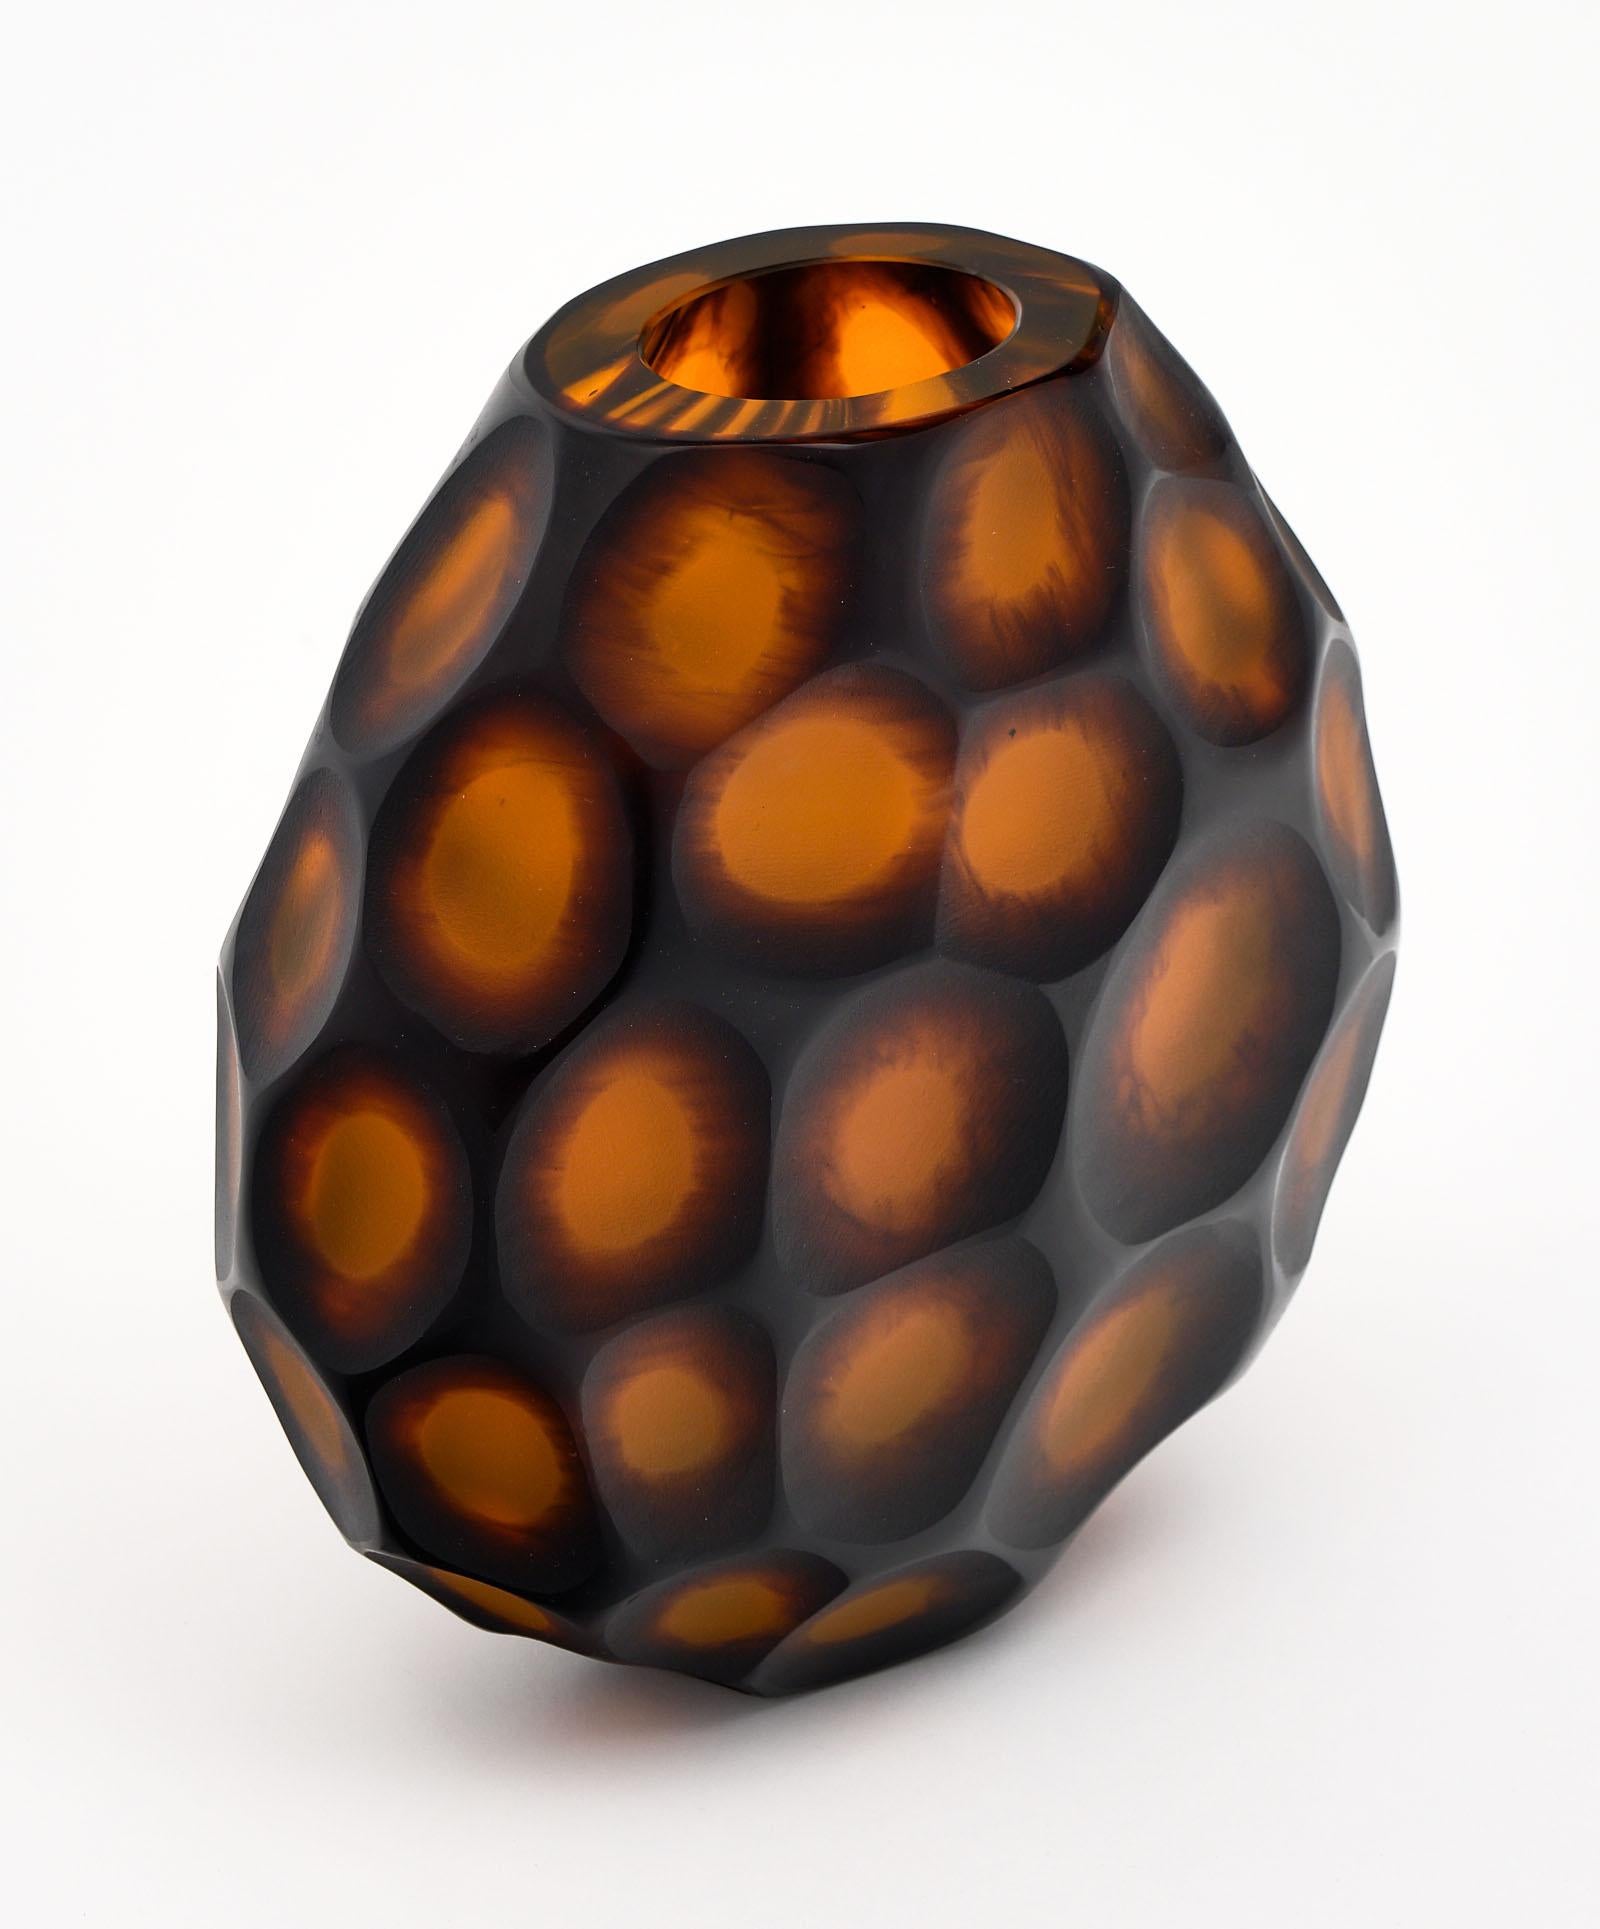 Murano glass “pavone” vase handcrafted and blown. We love this stunning piece with amber hues by Alberto Dona. Crafted by “molato a diaminte” or diamond molded. This vase is signed on the bottom.